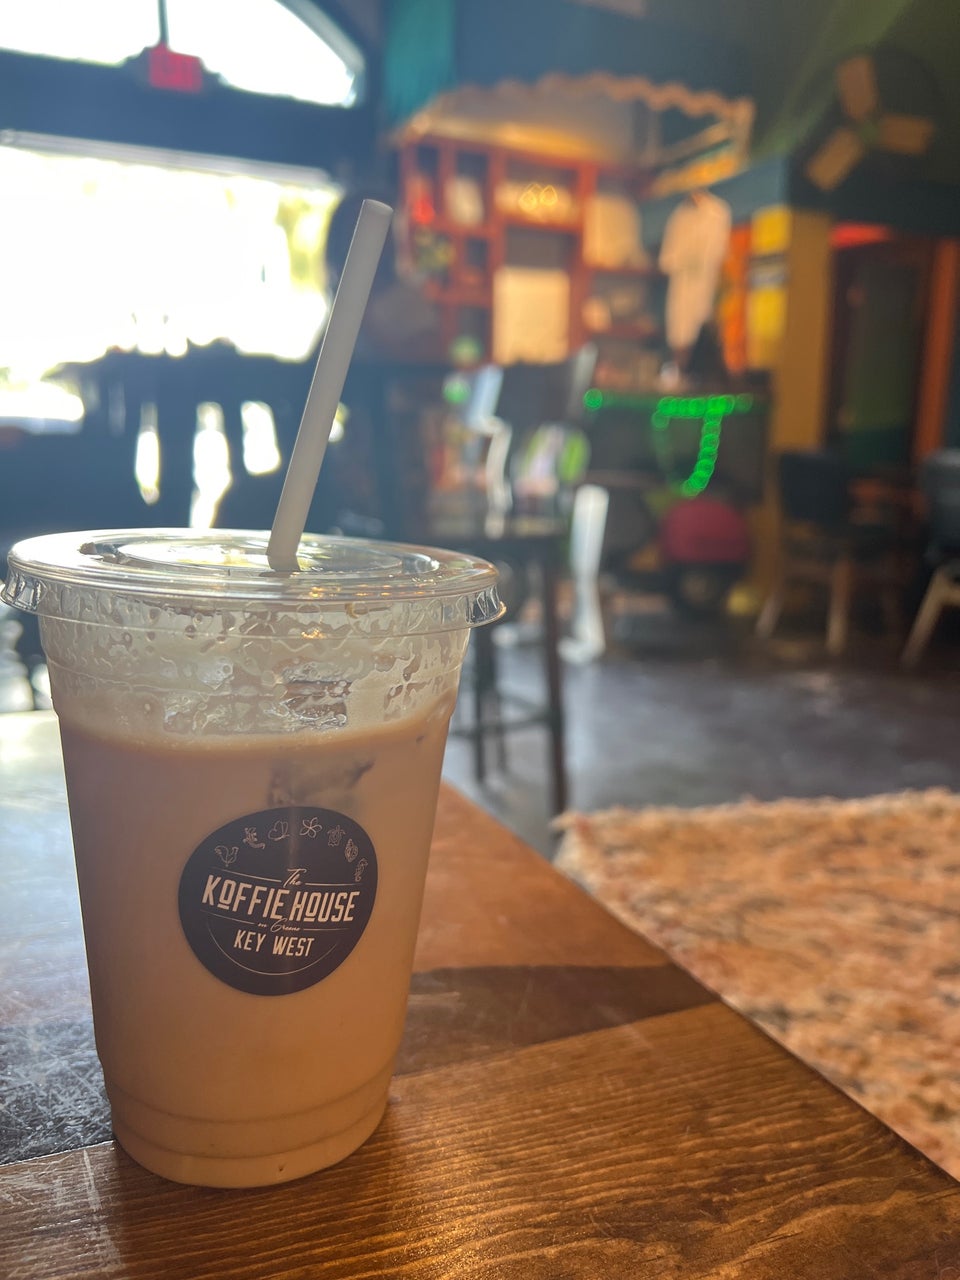 The Koffie House